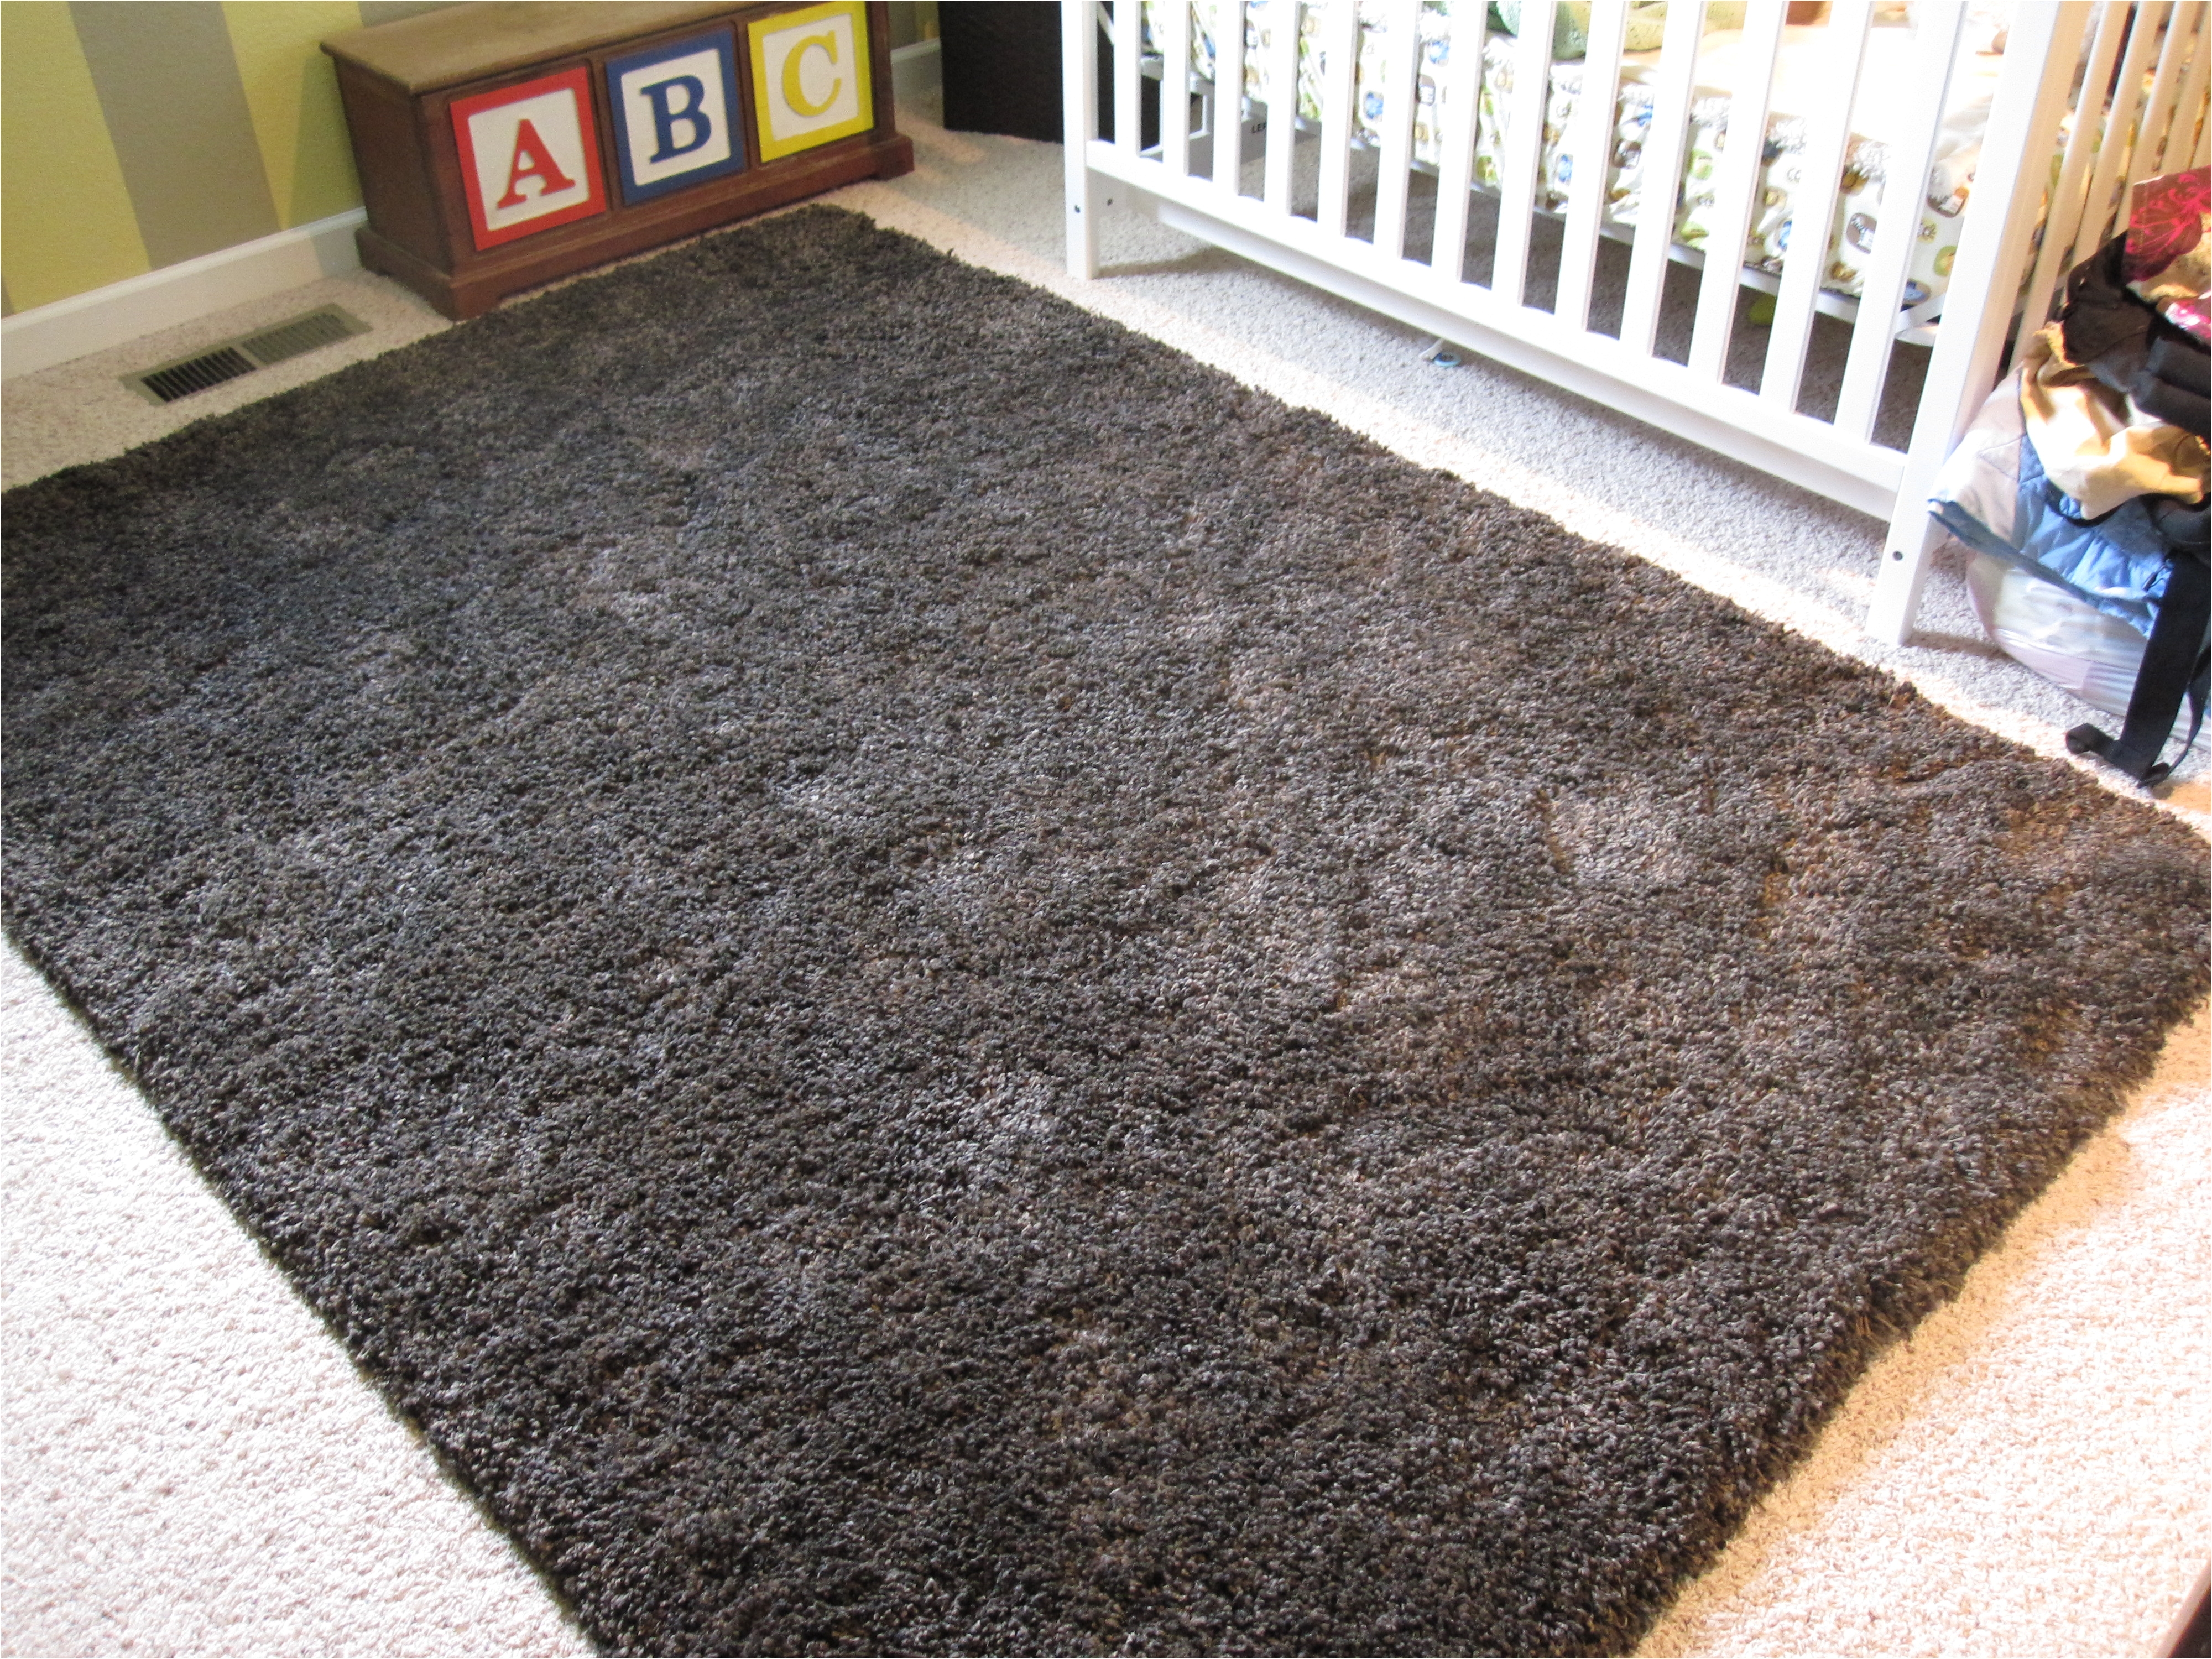 faux sheepskin rug costco beautiful flooring rugs cool costco area rugs decor for your family